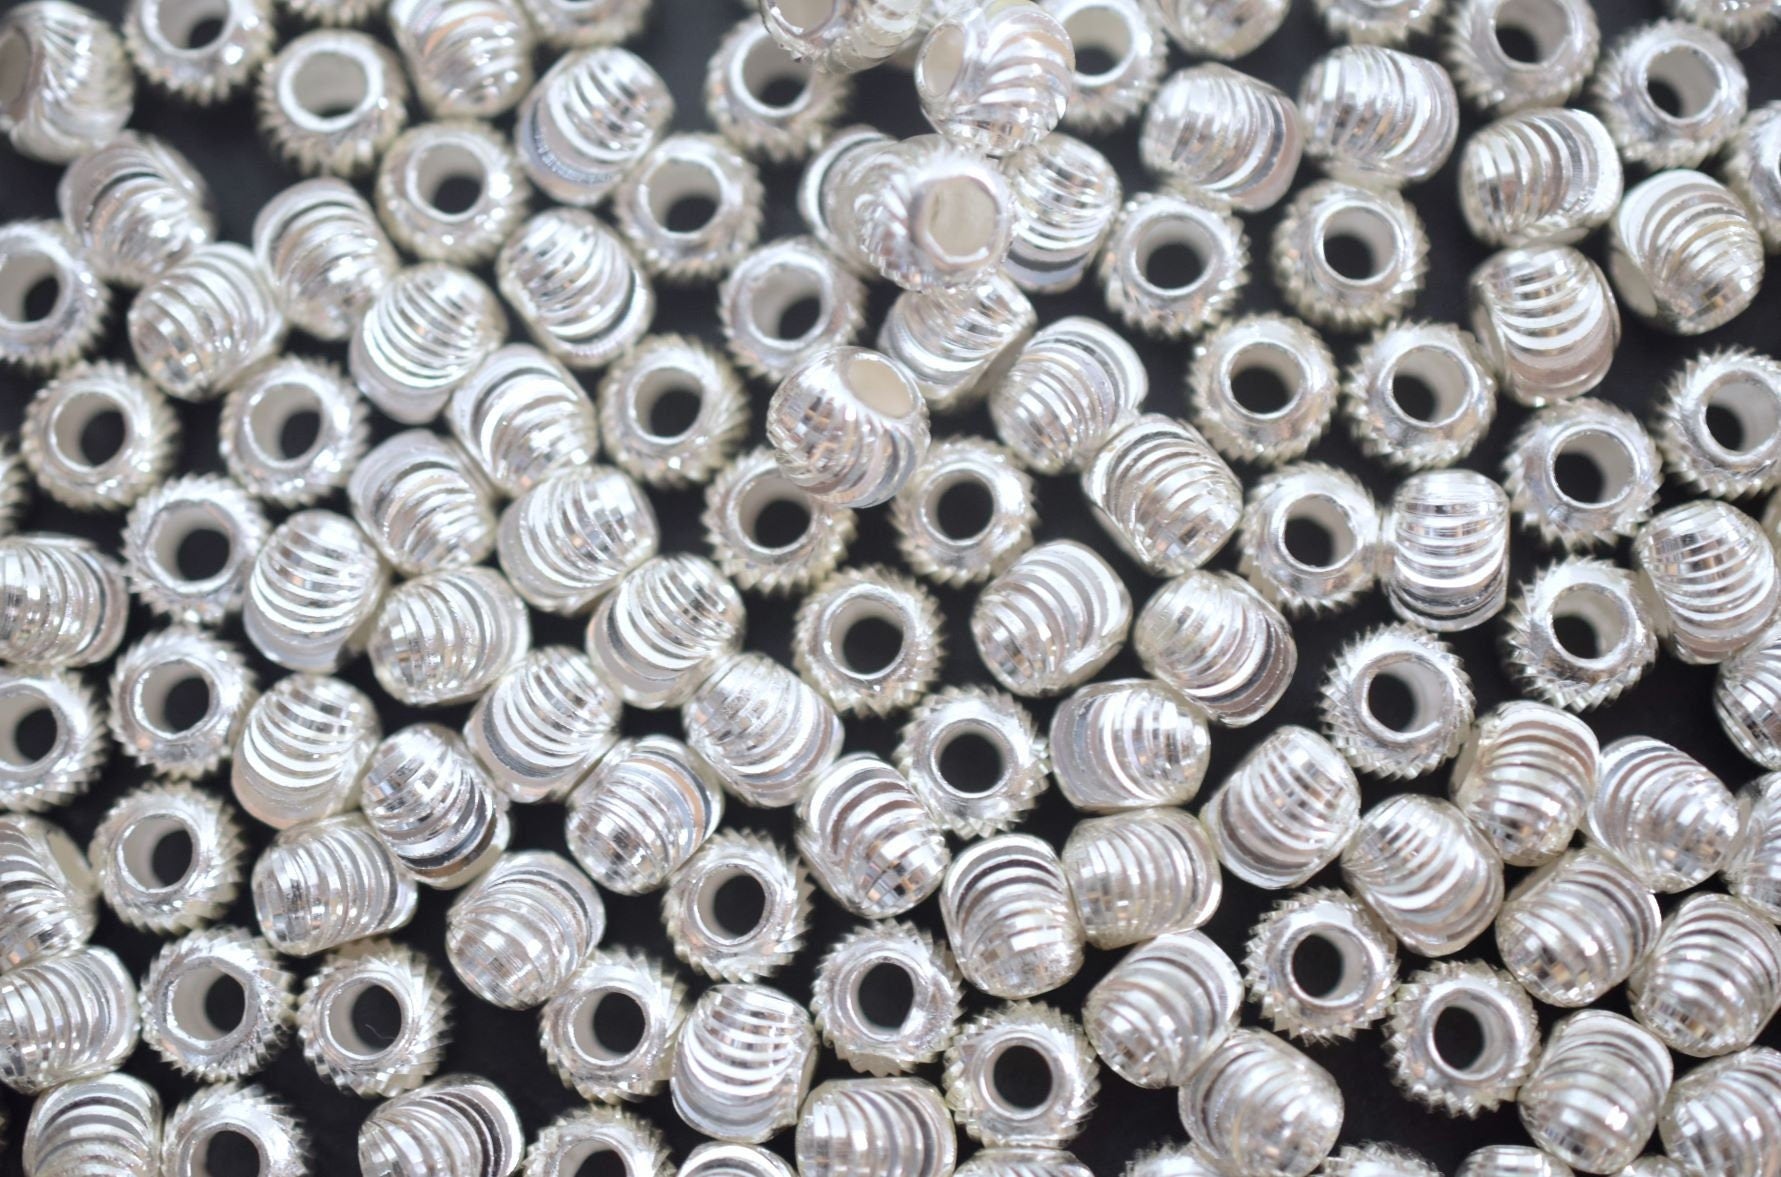 6 PCs/ Pack 925 Sterling Silver Diamond Cut Round Beads European Style Size 3mm/4mm/5mm/6mm For Jewelry Supplier and wholesale